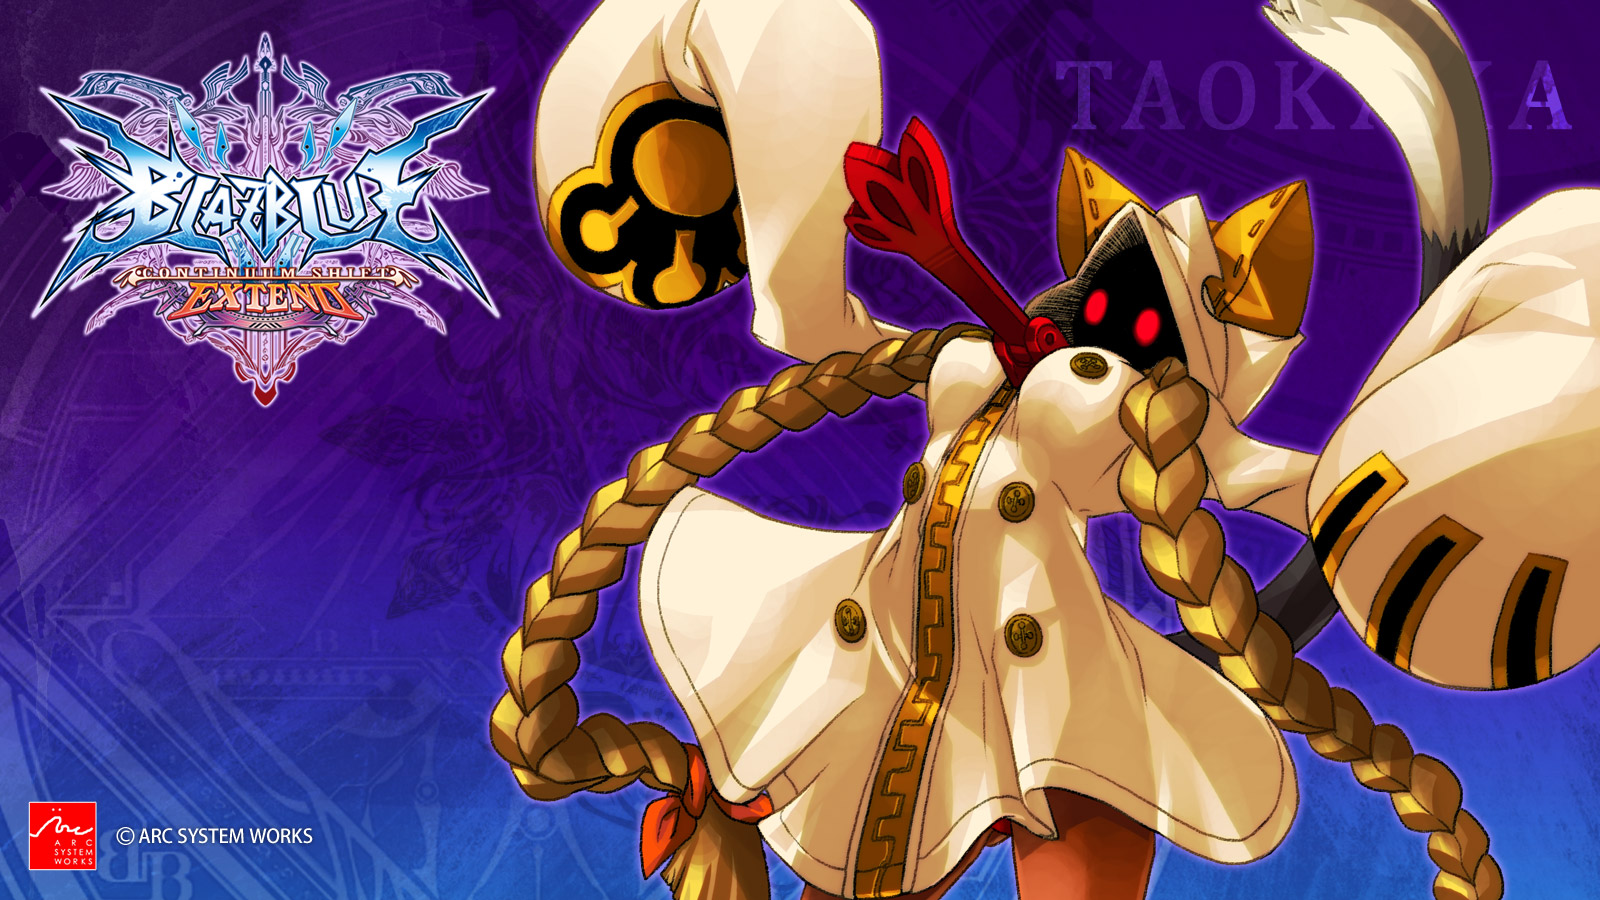 Blazblue Continuum Shift Extend Wallpaper 025 Taokaka Wallpapers Ethereal Games